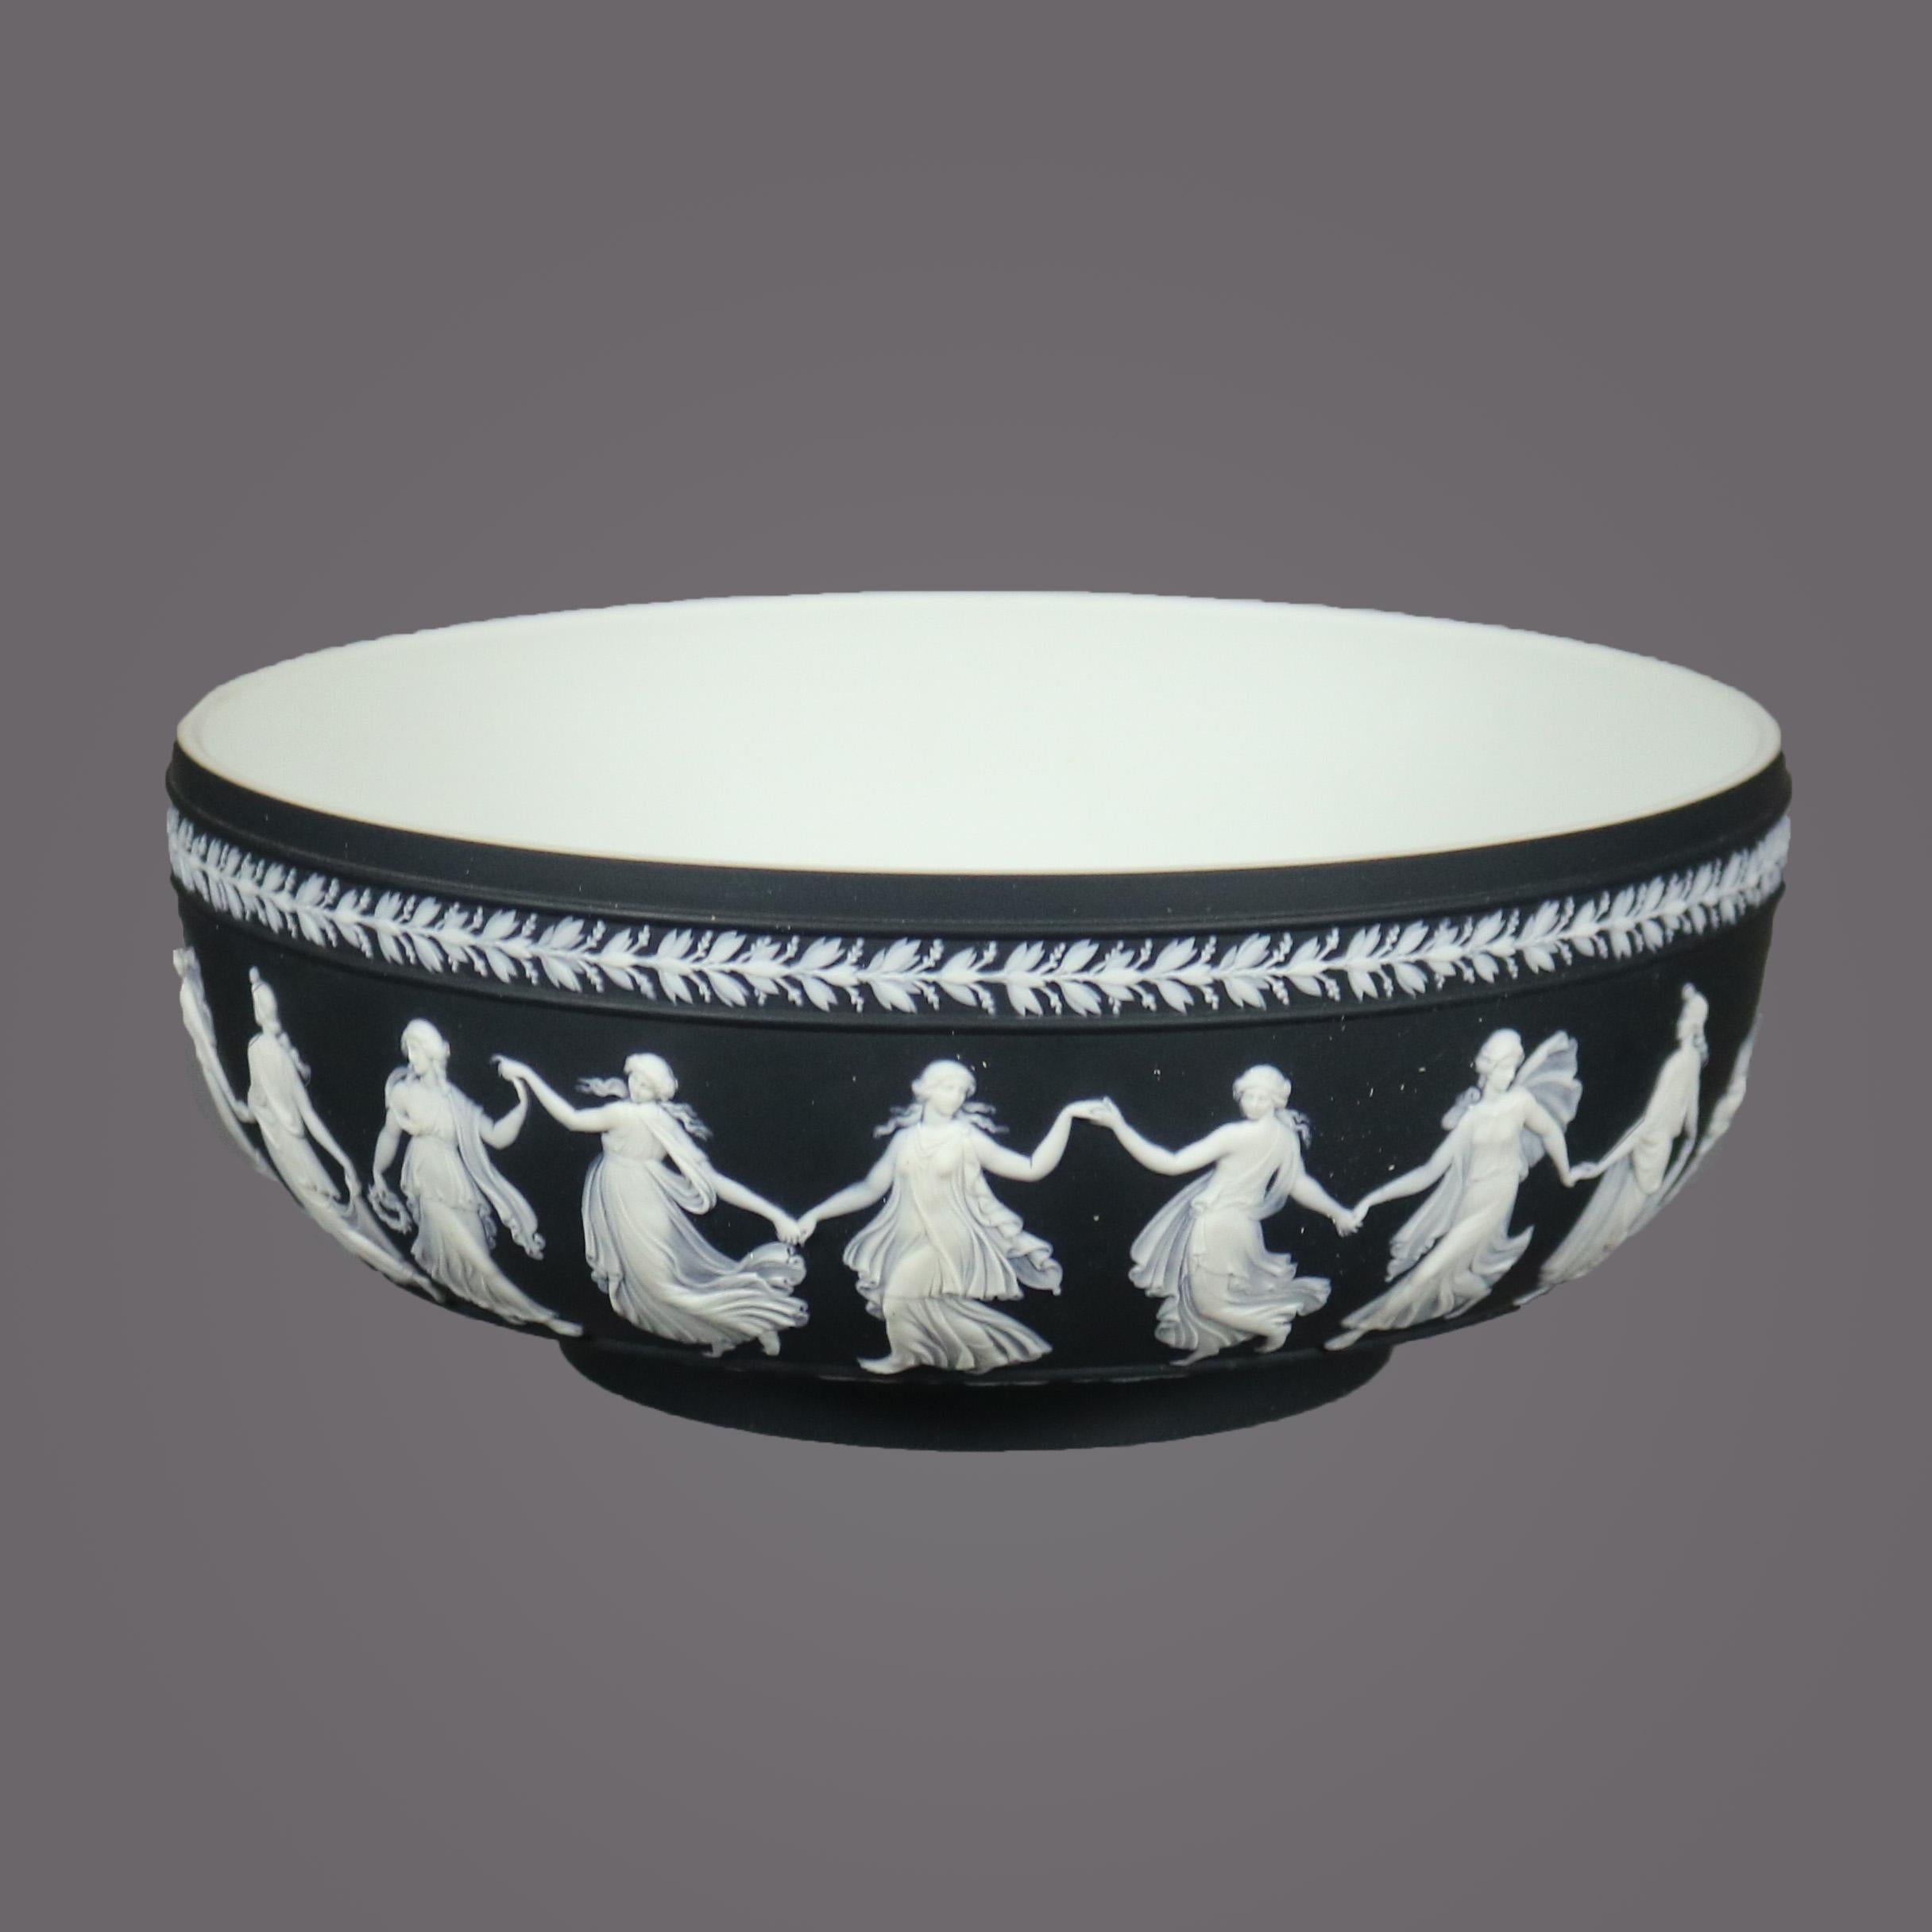 An antique English bowl by Wedgwood offers black basalt porcelain with Classical figures dancing, maker mark on base as photographed, circa 1900

Measures - 4